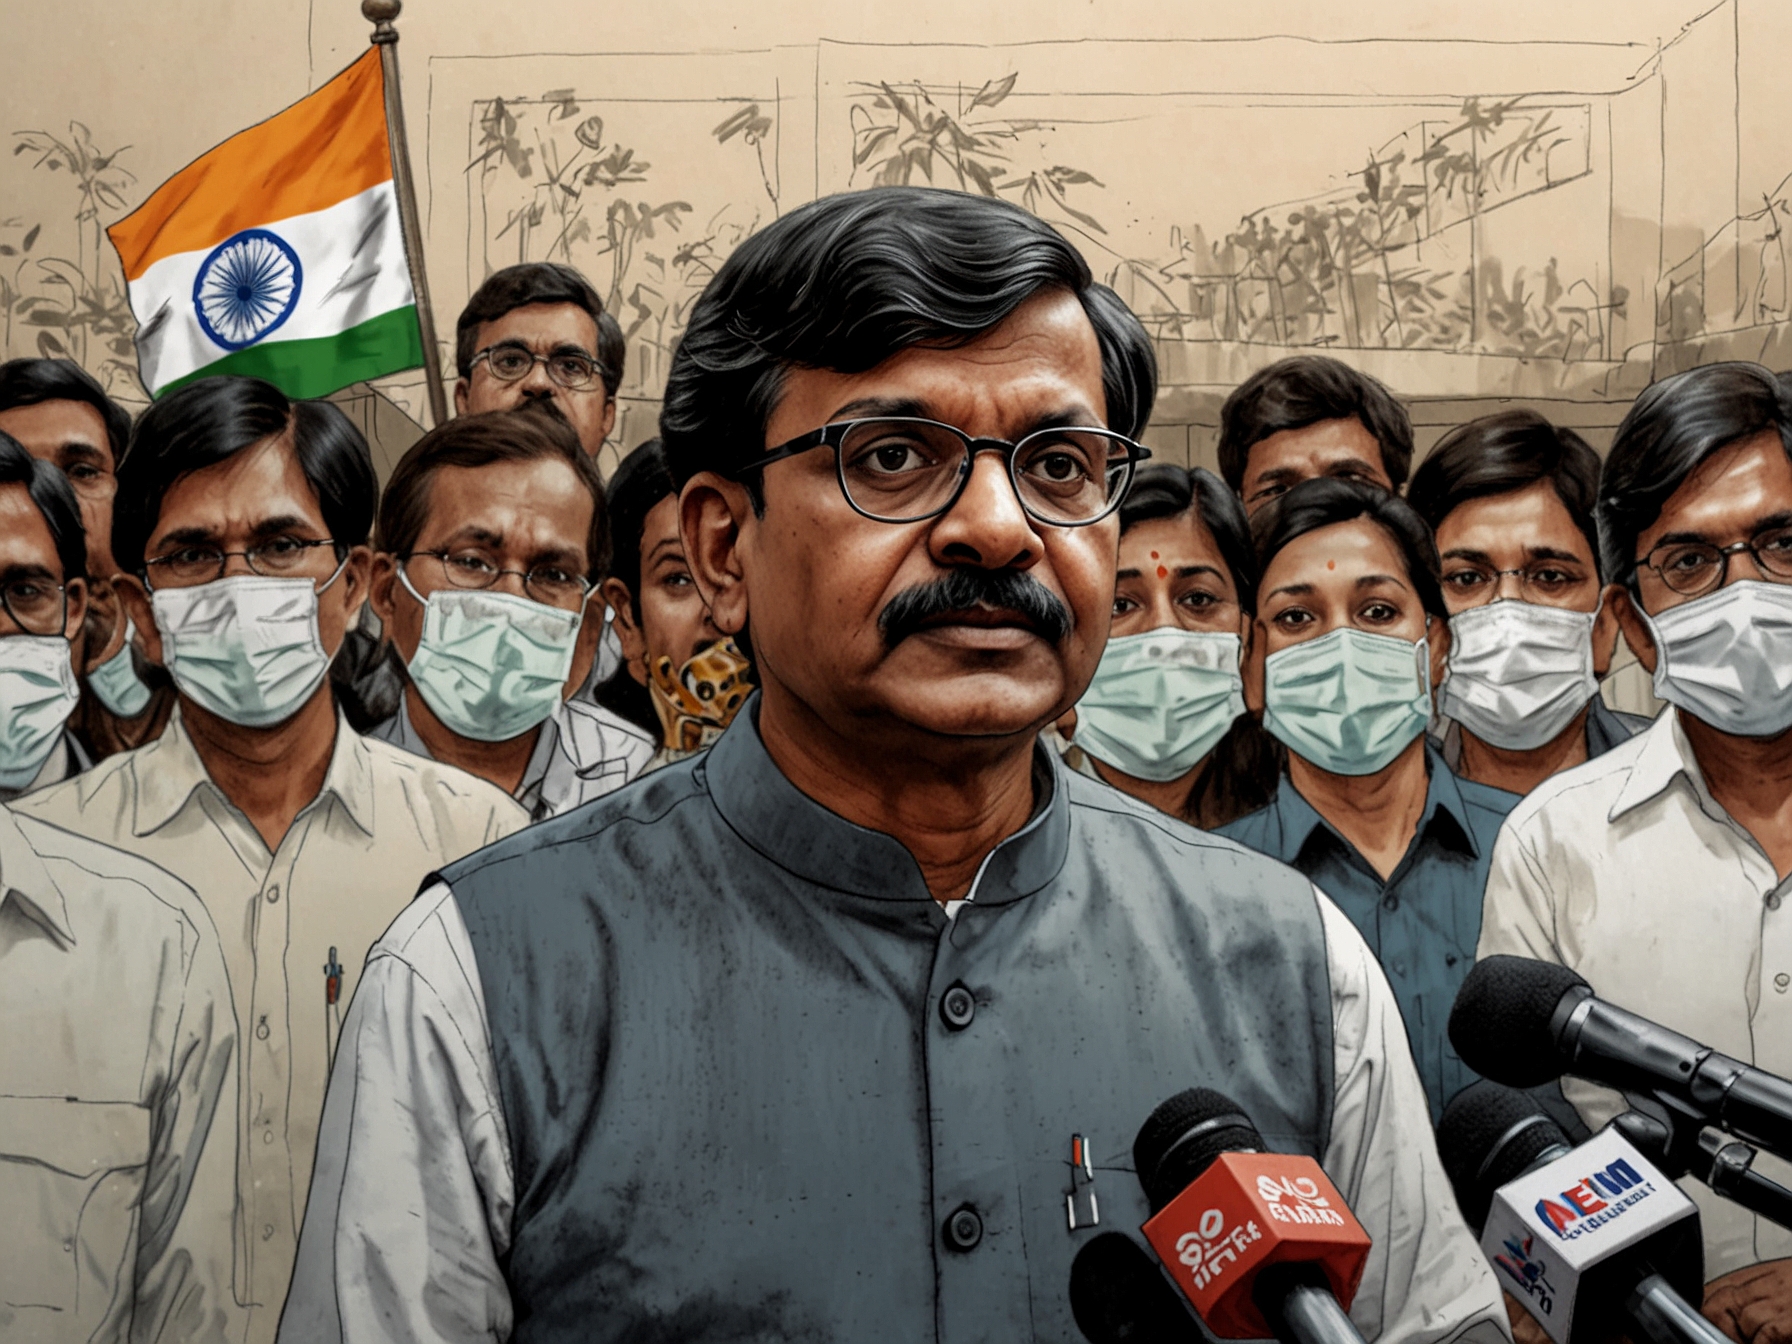 An illustration of Sanjay Raut speaking at a press conference, highlighting his claims of an 'emergency-like situation' in India over the past decade, with reporters and cameras focused on him.